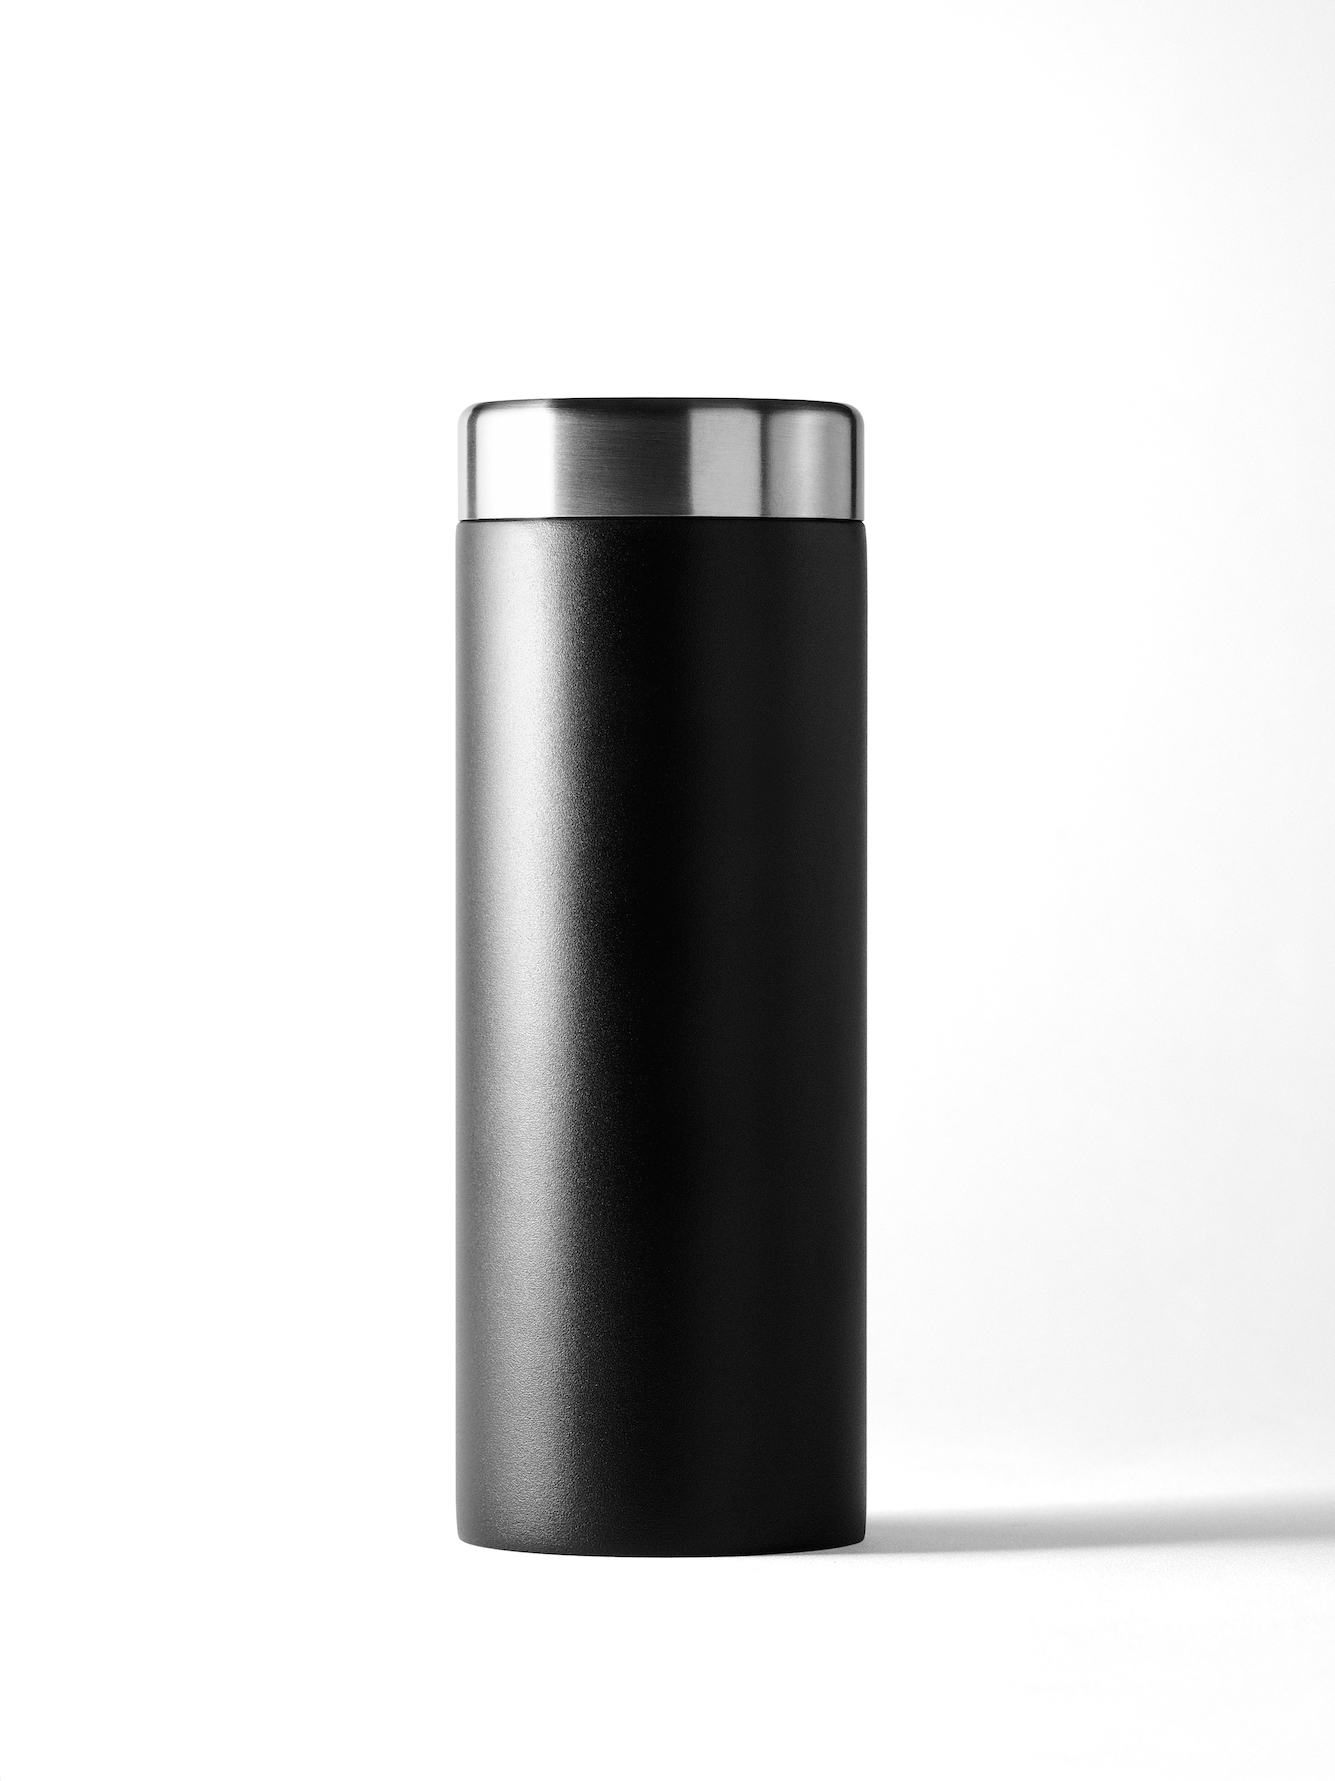 Flip19 - THAT! Therma Glass Black, 320ml:10oz, AED 99_1